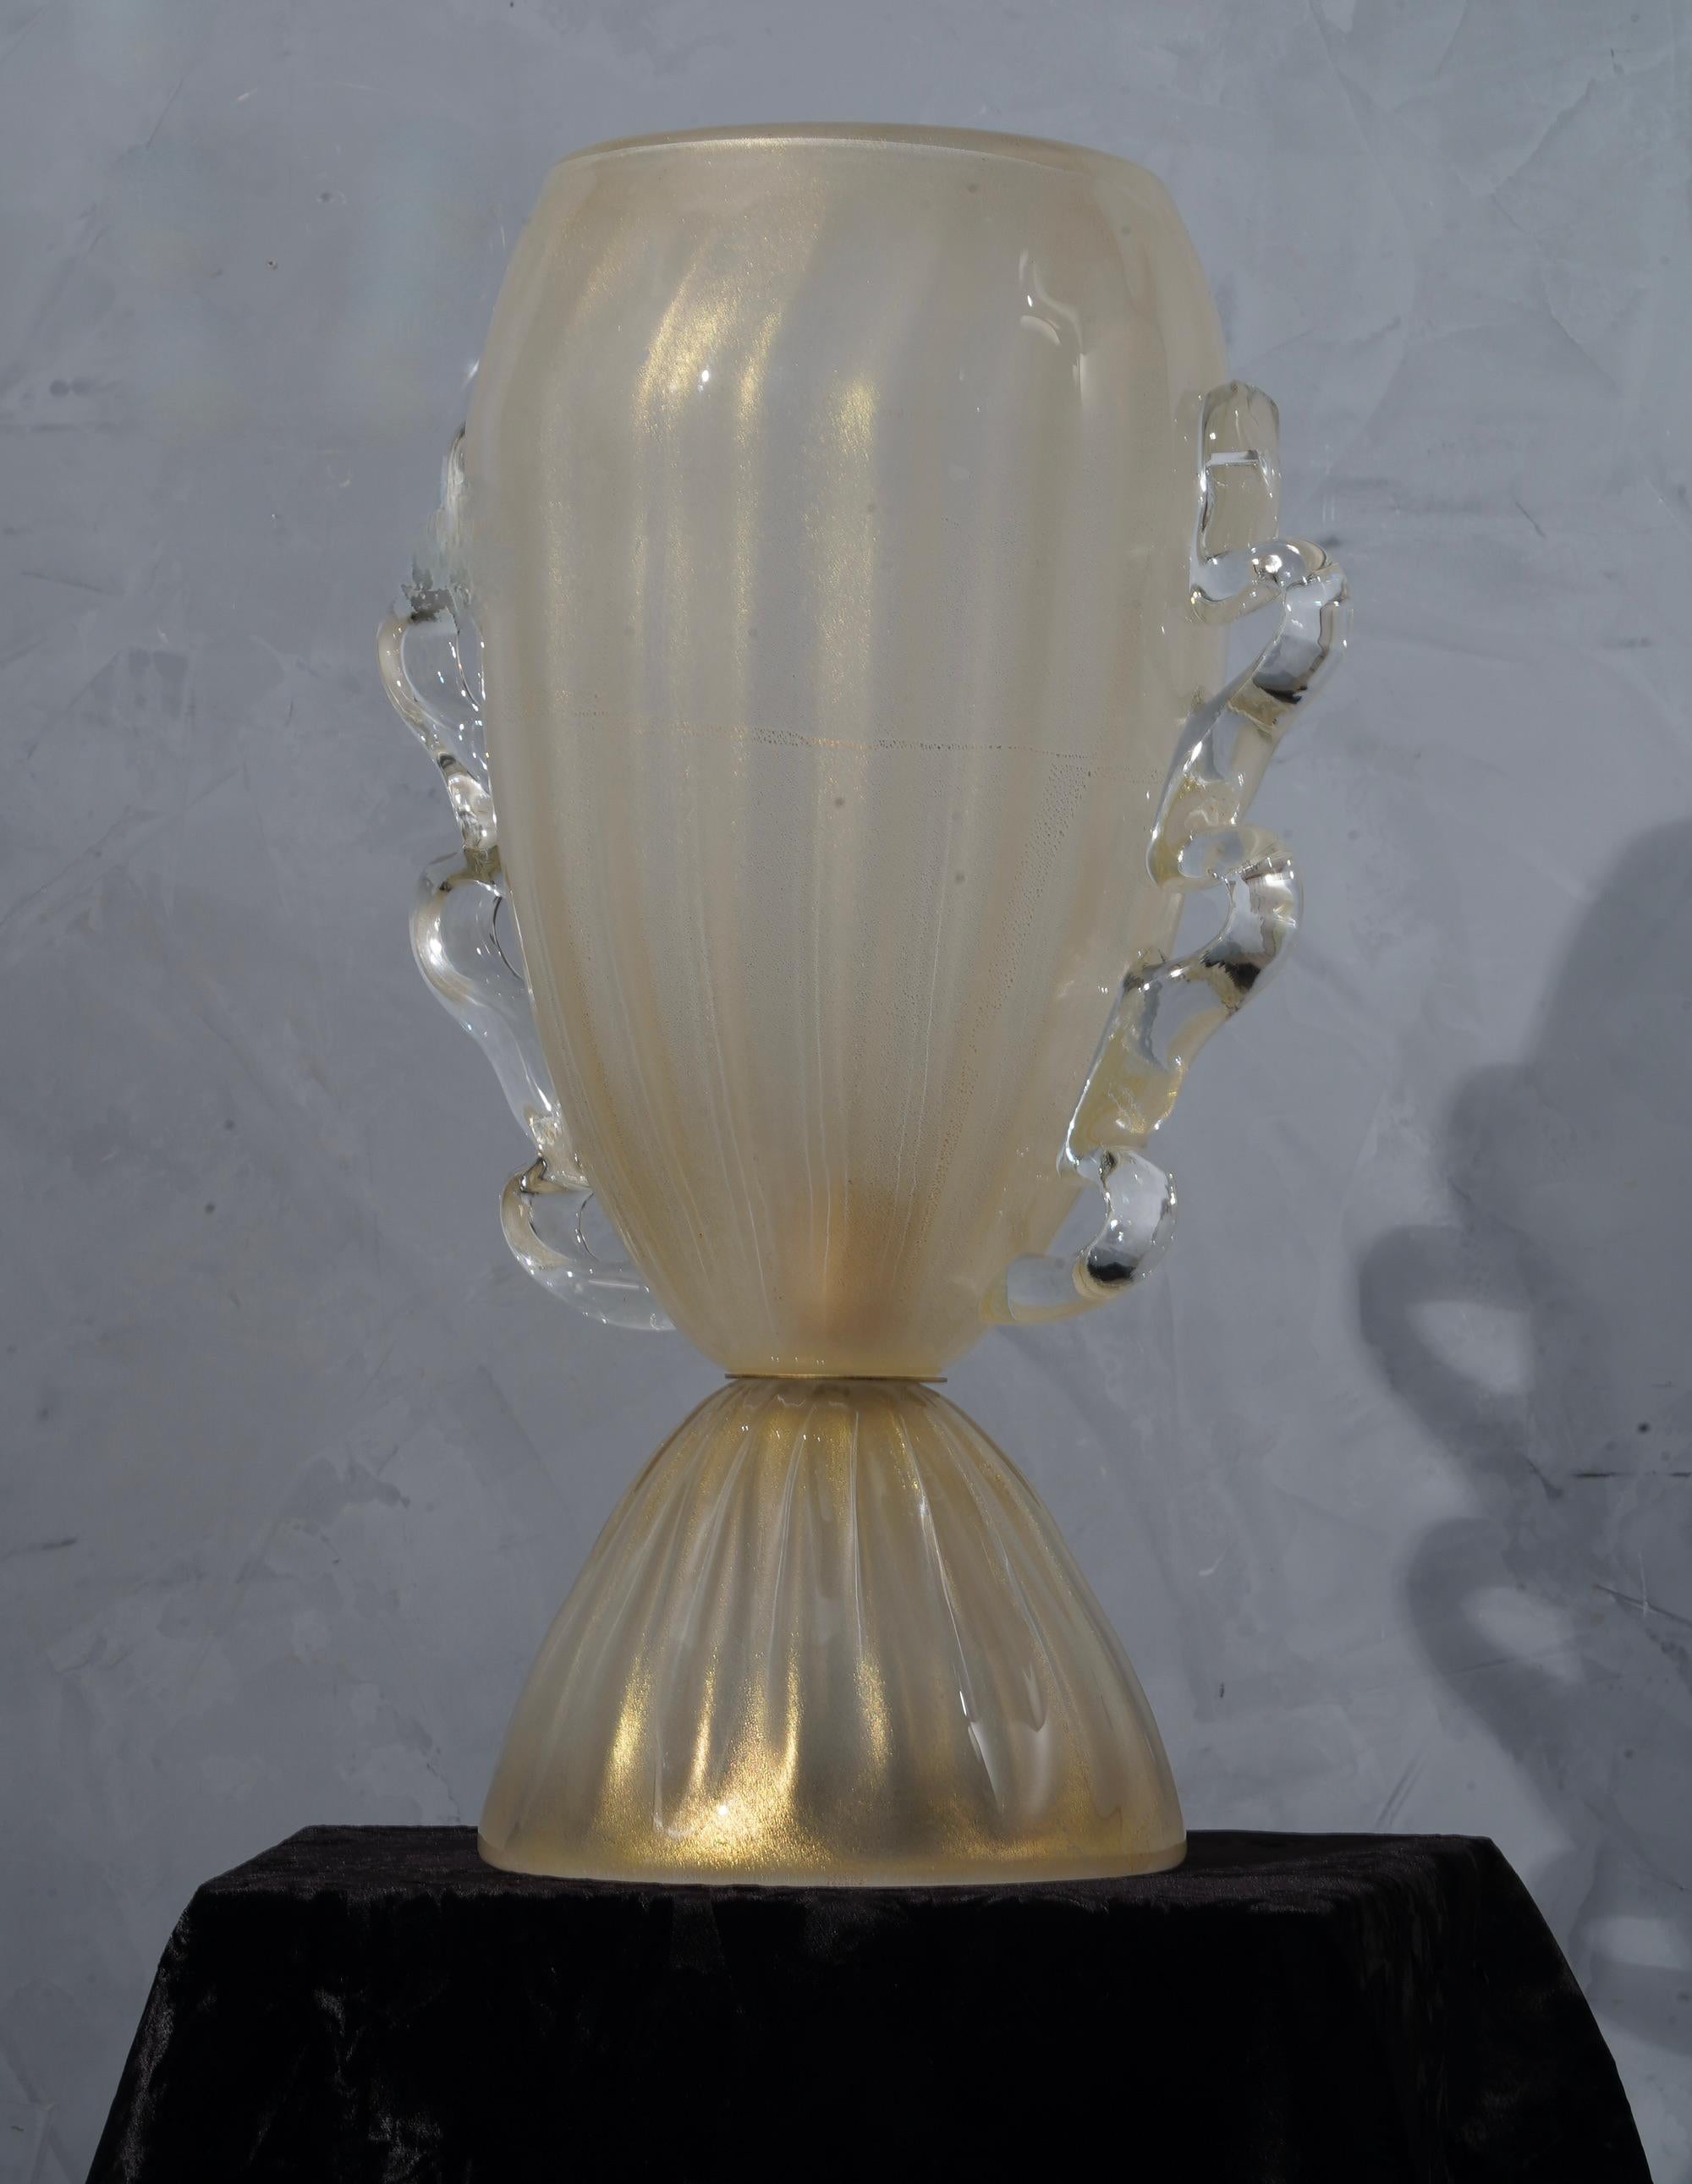 Splendid Barovier & Toso table lamps in gold color Murano glass. Very beautiful the handles along the sides coming down the lamp. A supreme gold color.

The table lamps are composed of a large upper cup, on which differently shaped glass handles are